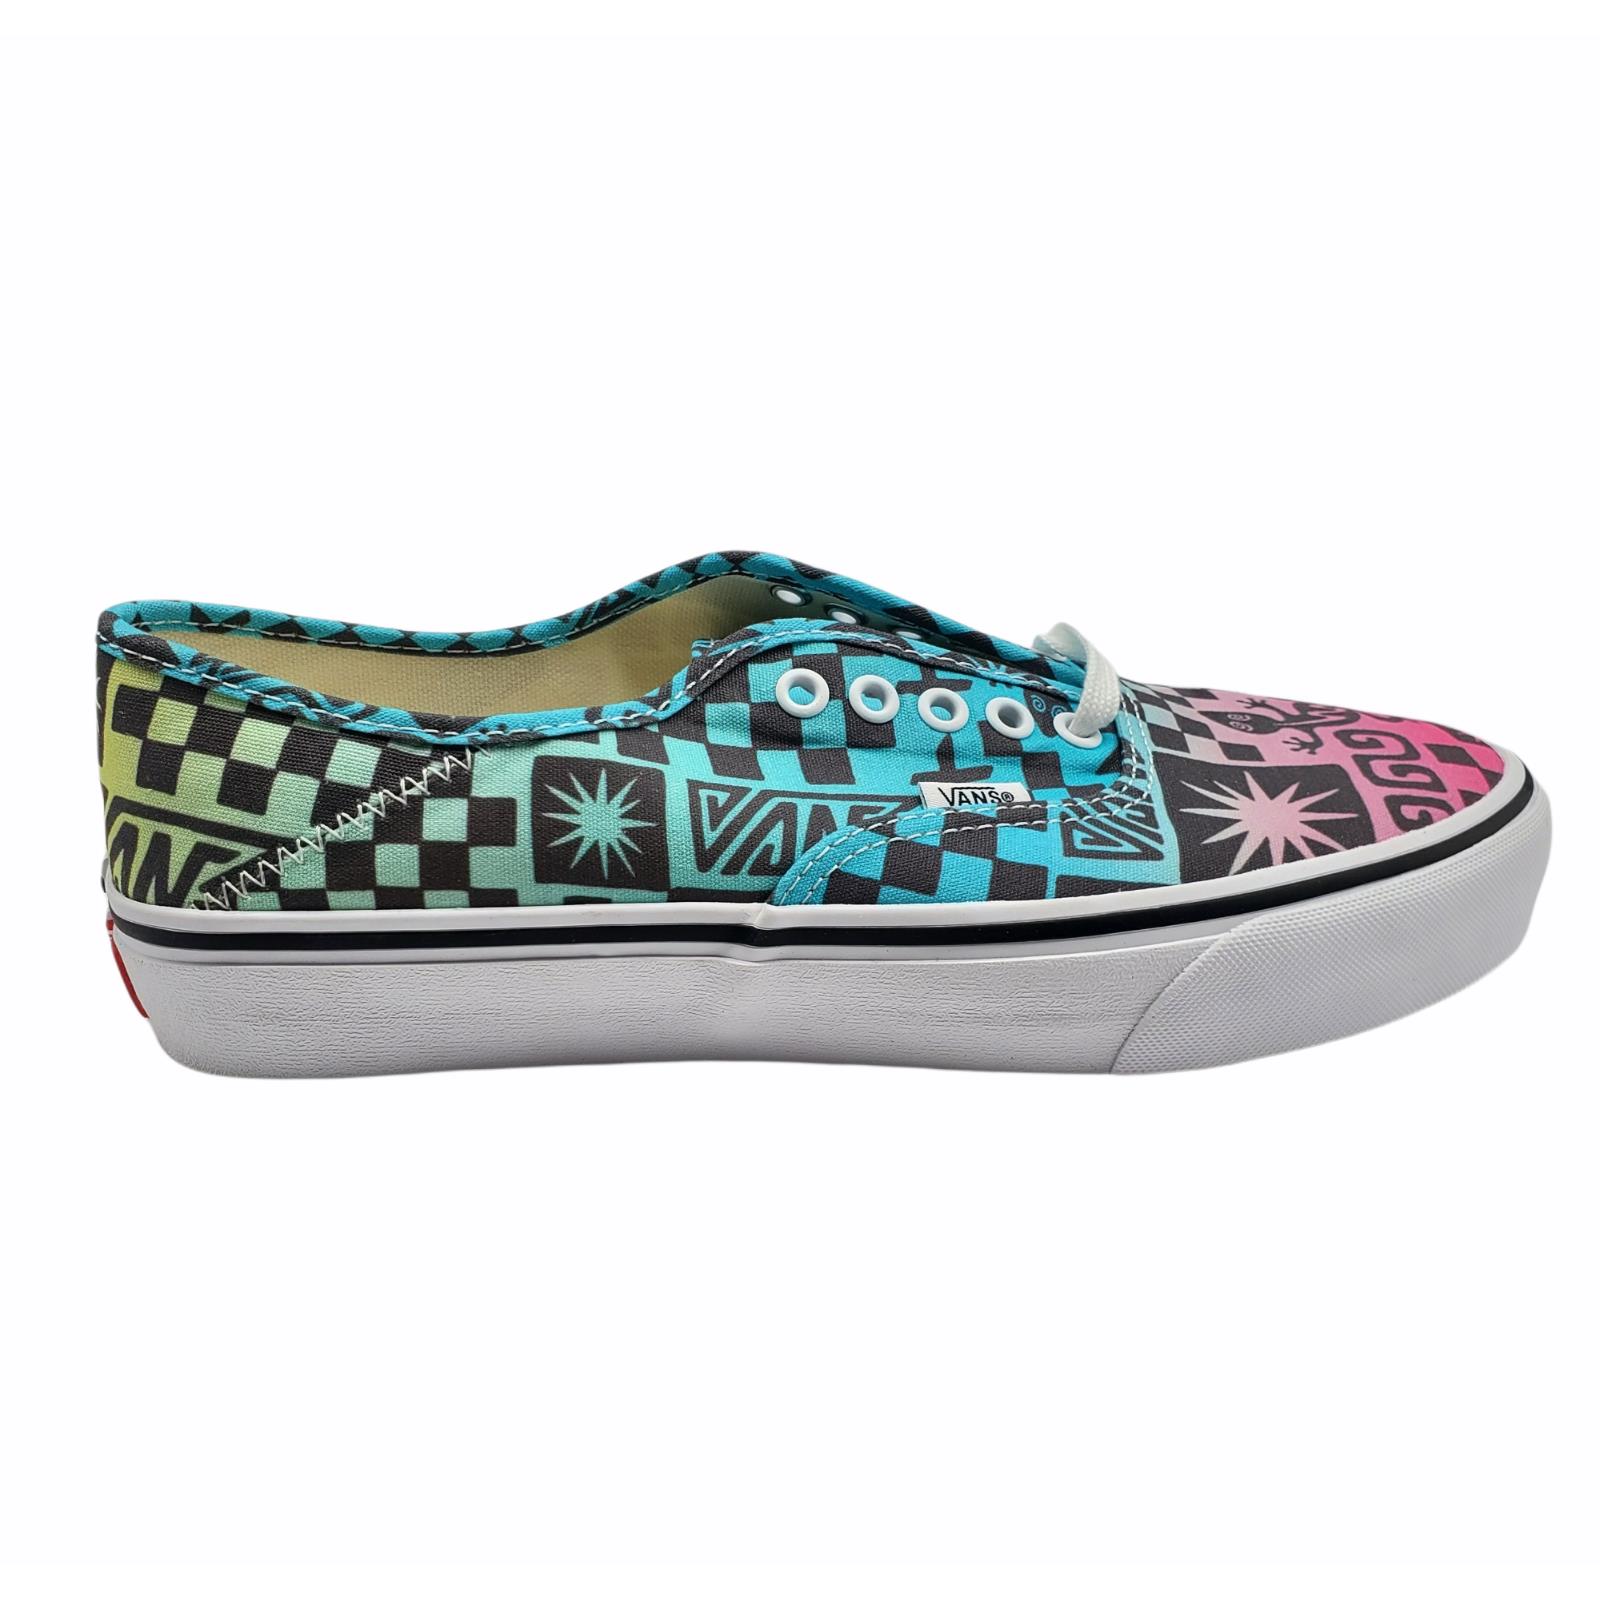 Vans Authentic SF SF Tribal Check Mens Multicolor Skateboard Shoes Size 10